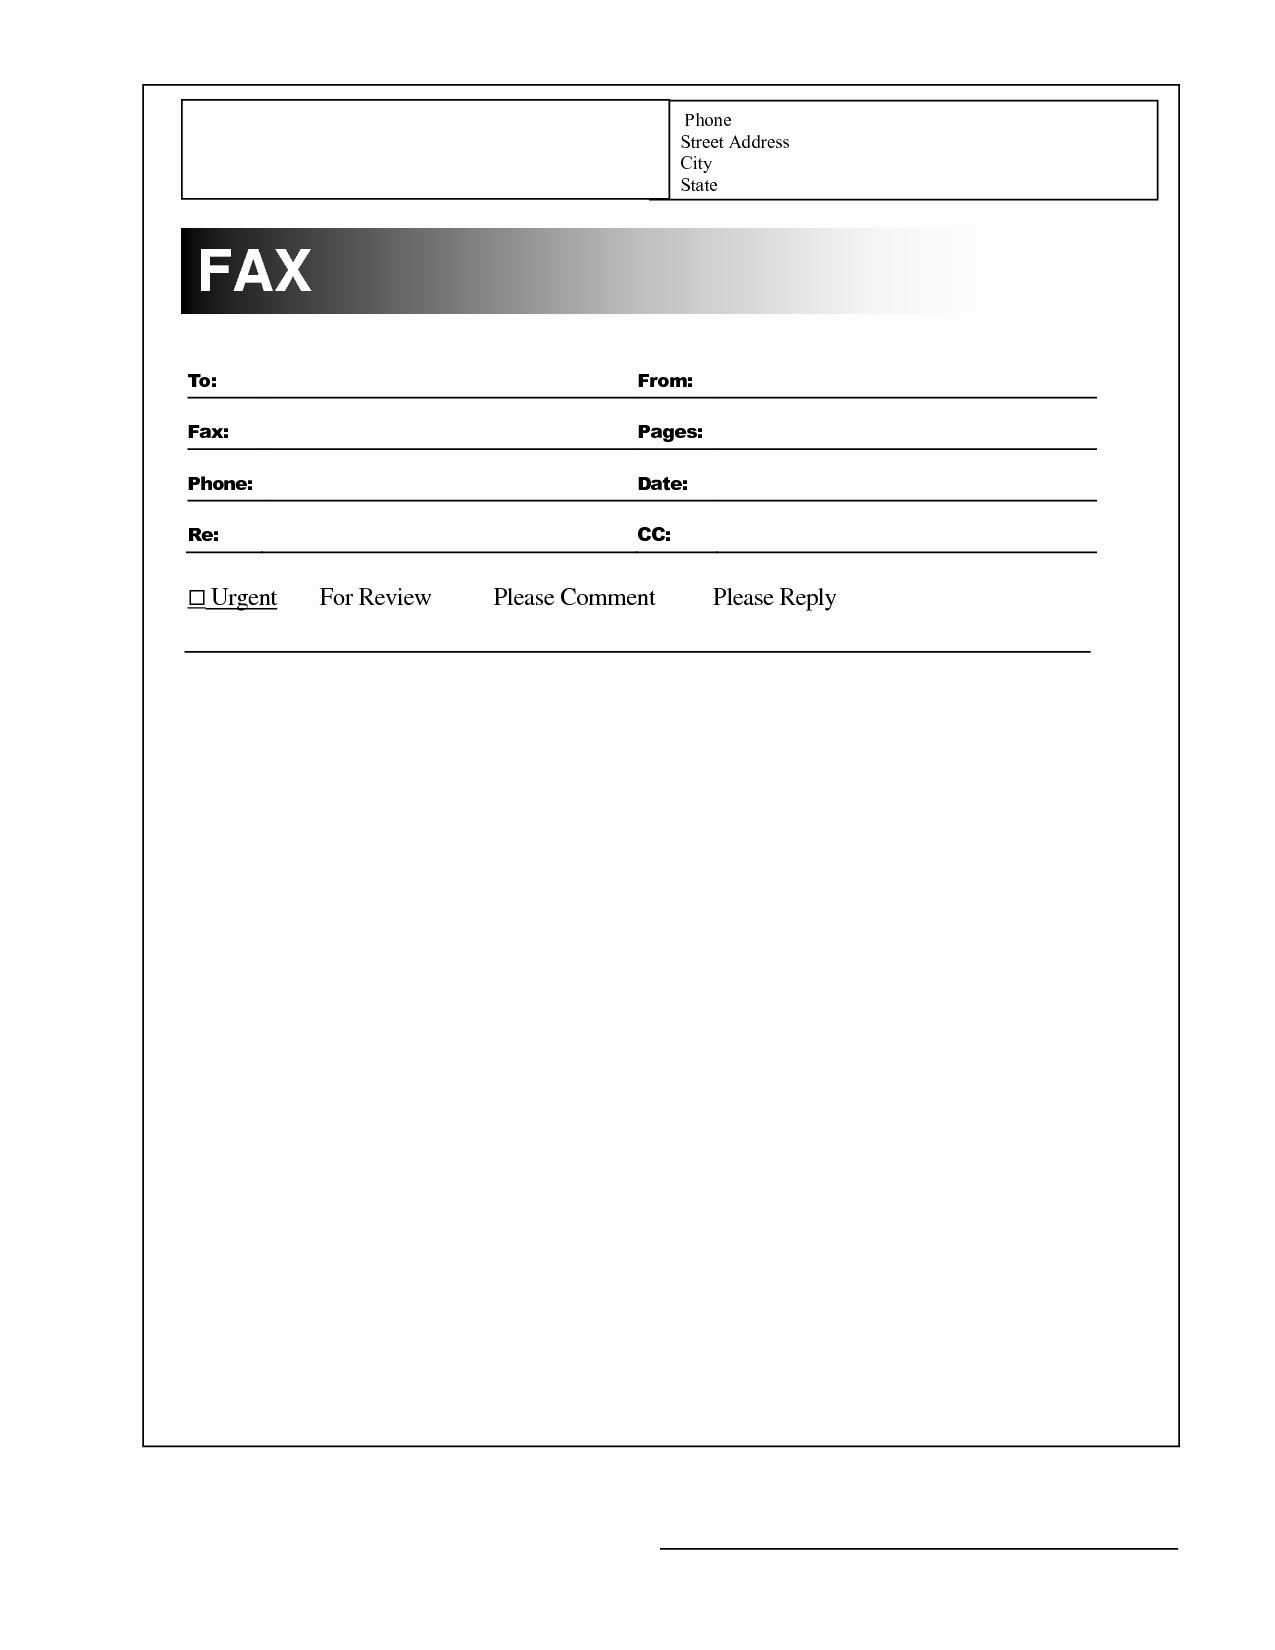 Personal Fax Cover Sheet Pdf Beautiful Best S Of Blank Fax Cover Sheet Blank Fax Cover